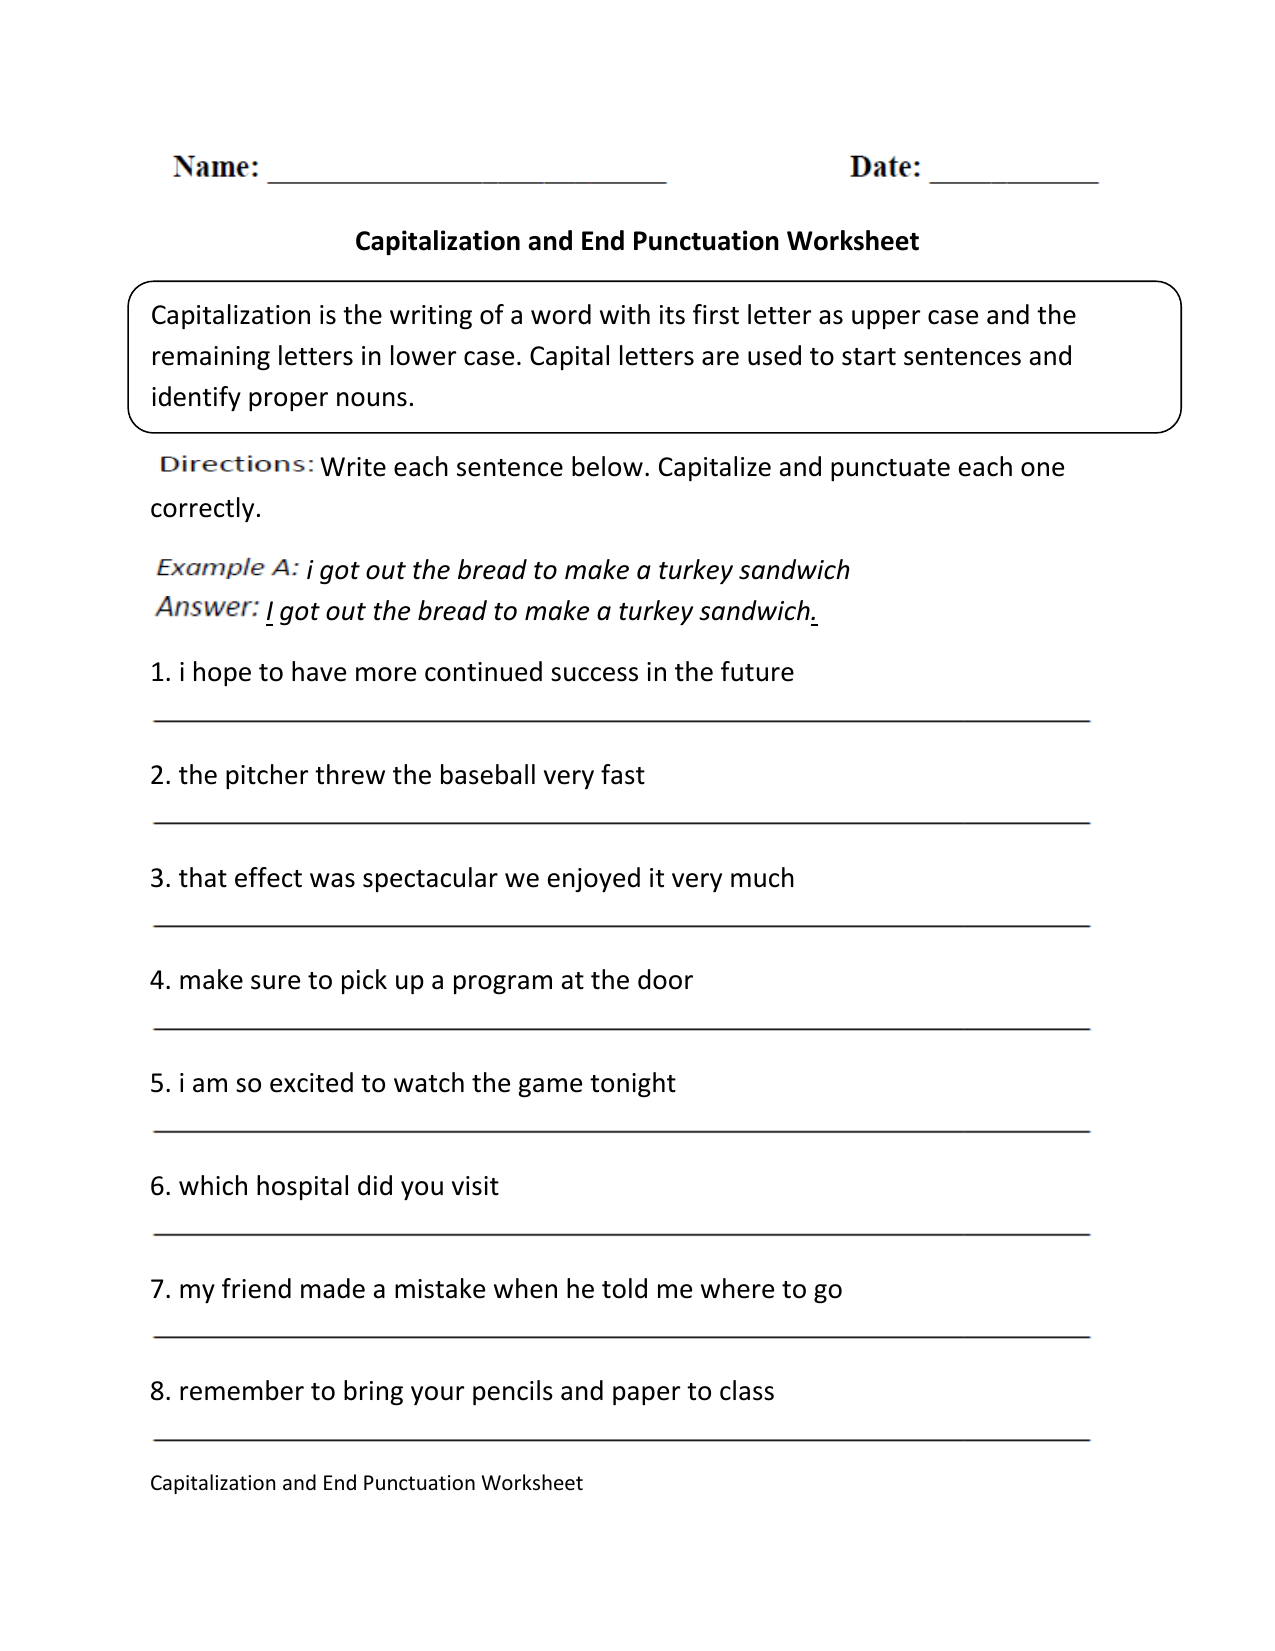 free-printable-worksheets-for-punctuation-and-capitalization-free-printable